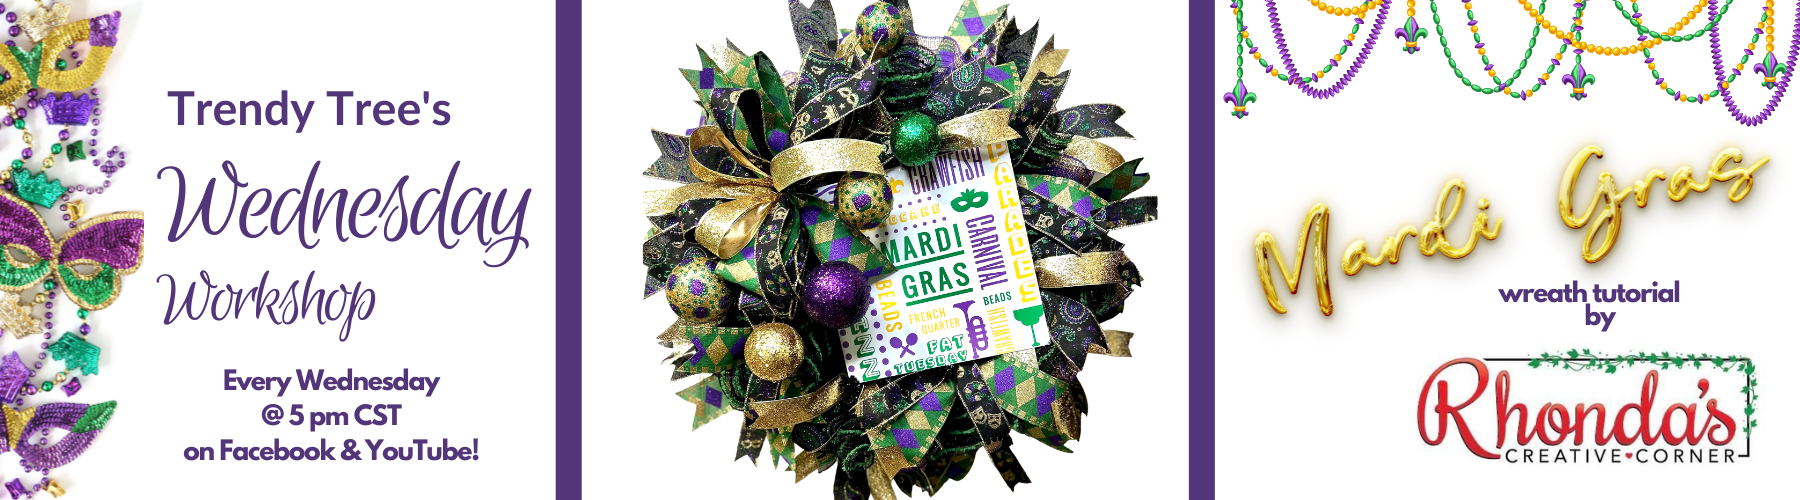 mardi gras wreath made by ruffle technique with deco mesh, ribbons, sign and glitter ball picks